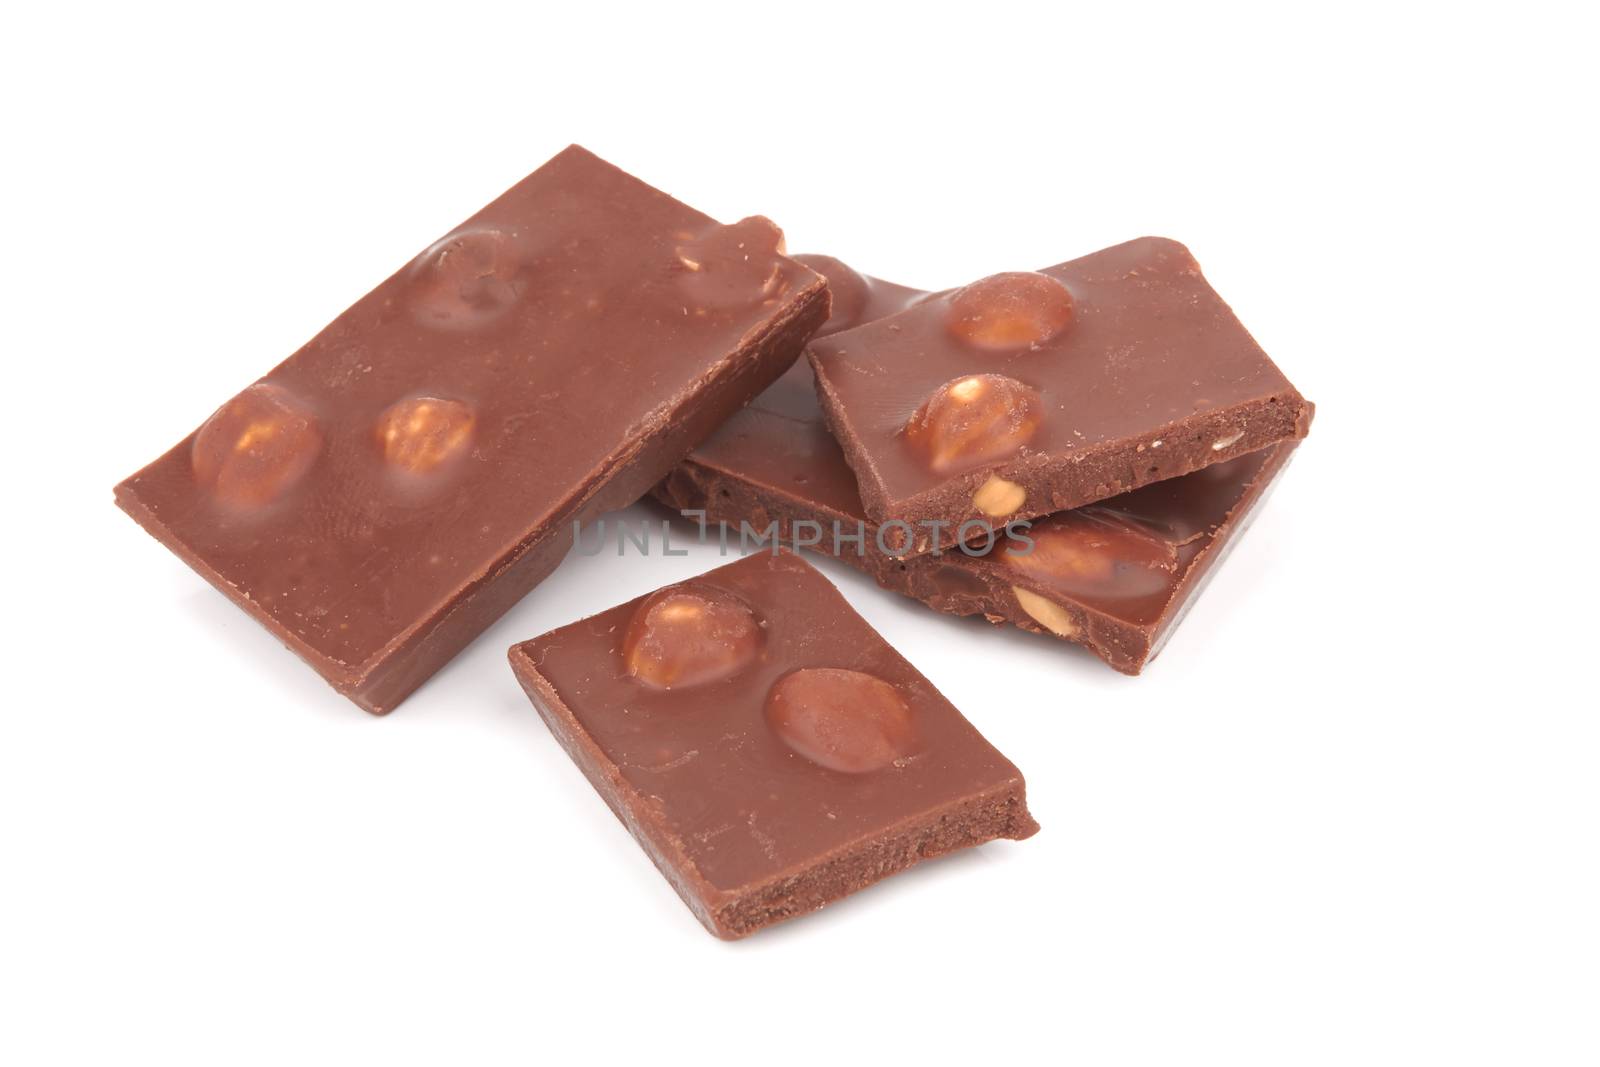 Broken chocolate bar isolated on a white background